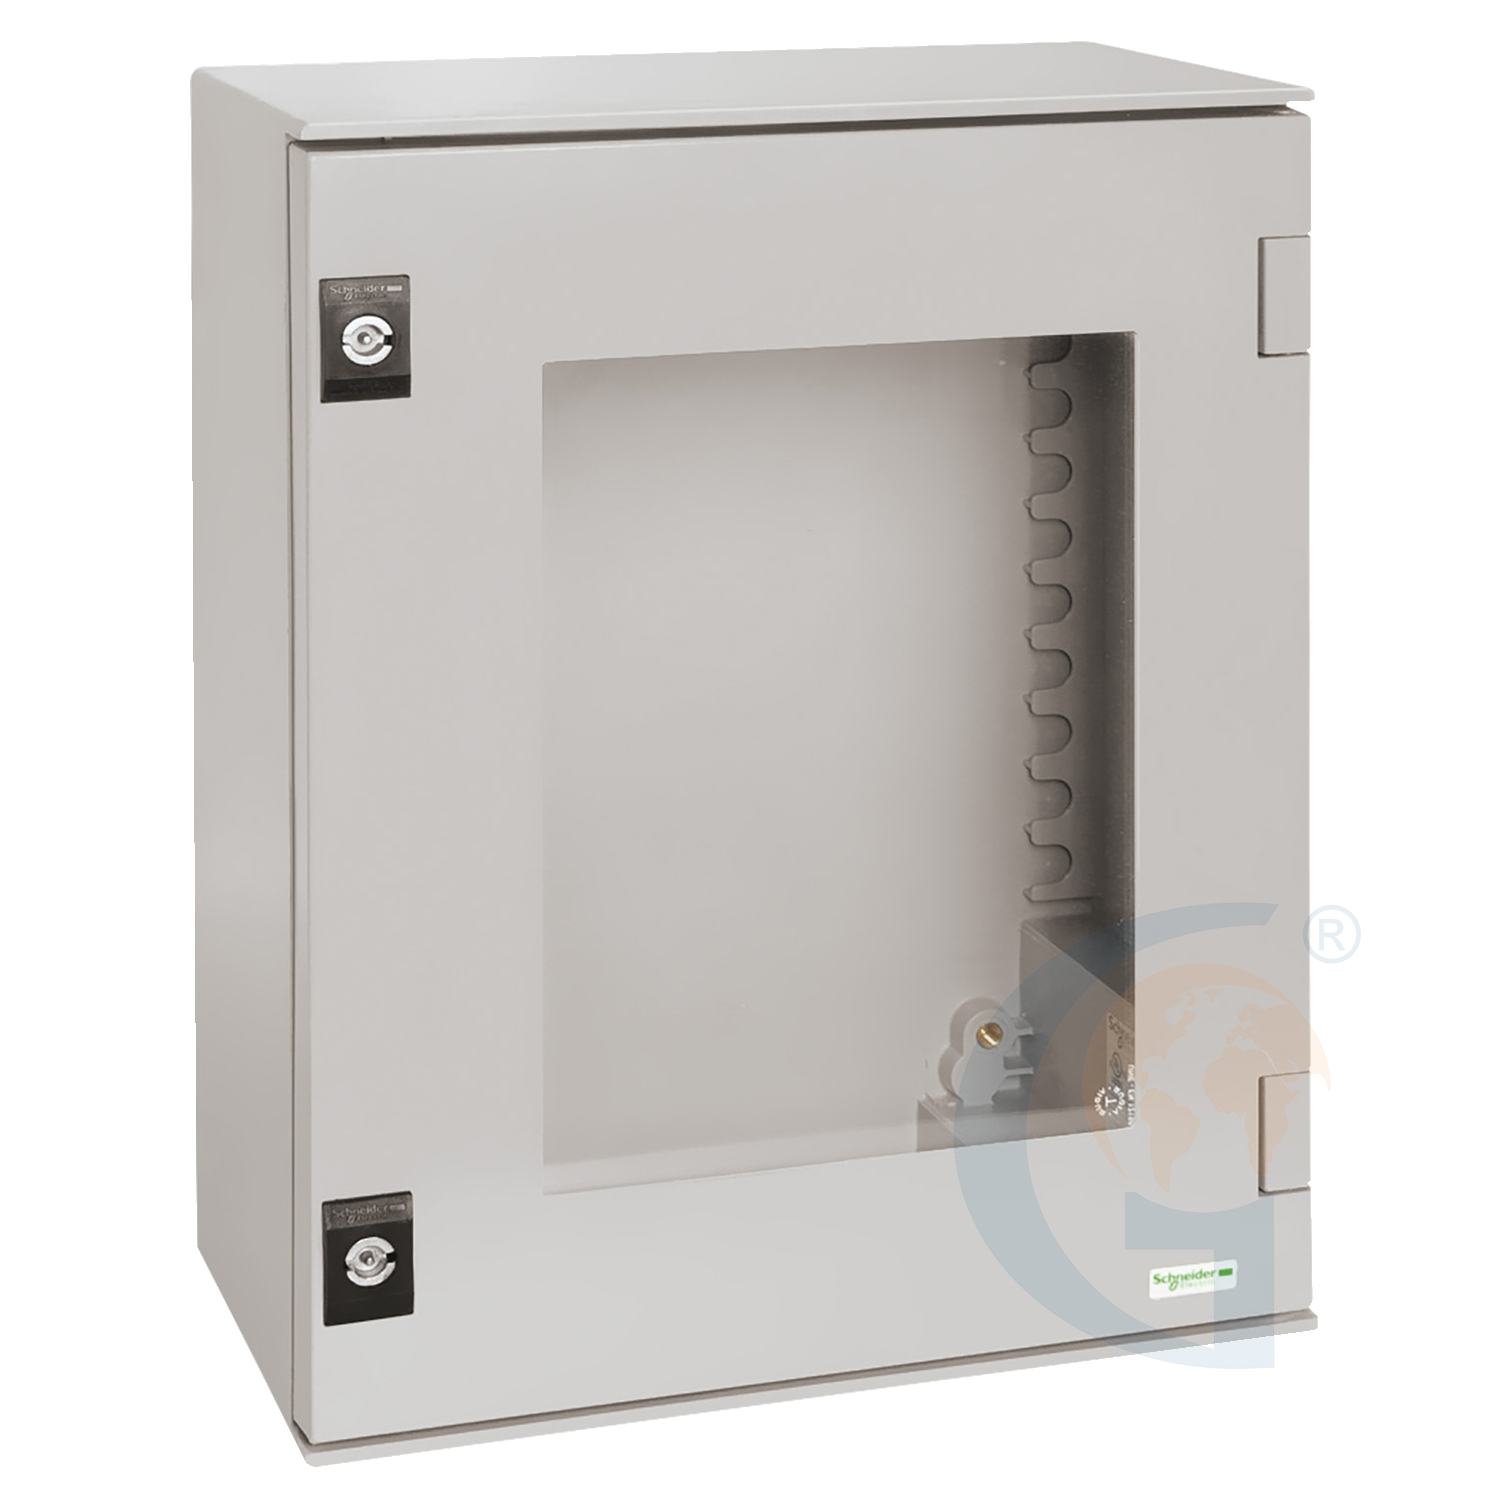 Schneider Electric NSYPLM75TG WALL-MOUNTING ENCLOSURE POLYESTER MONOBLOC IP66 H747XW536XD300MM GLAZED DOOR https://gesrepair.com/wp-content/uploads/2020/Schneider/Schneider_Electric_NSYPLM75TG_.jpg